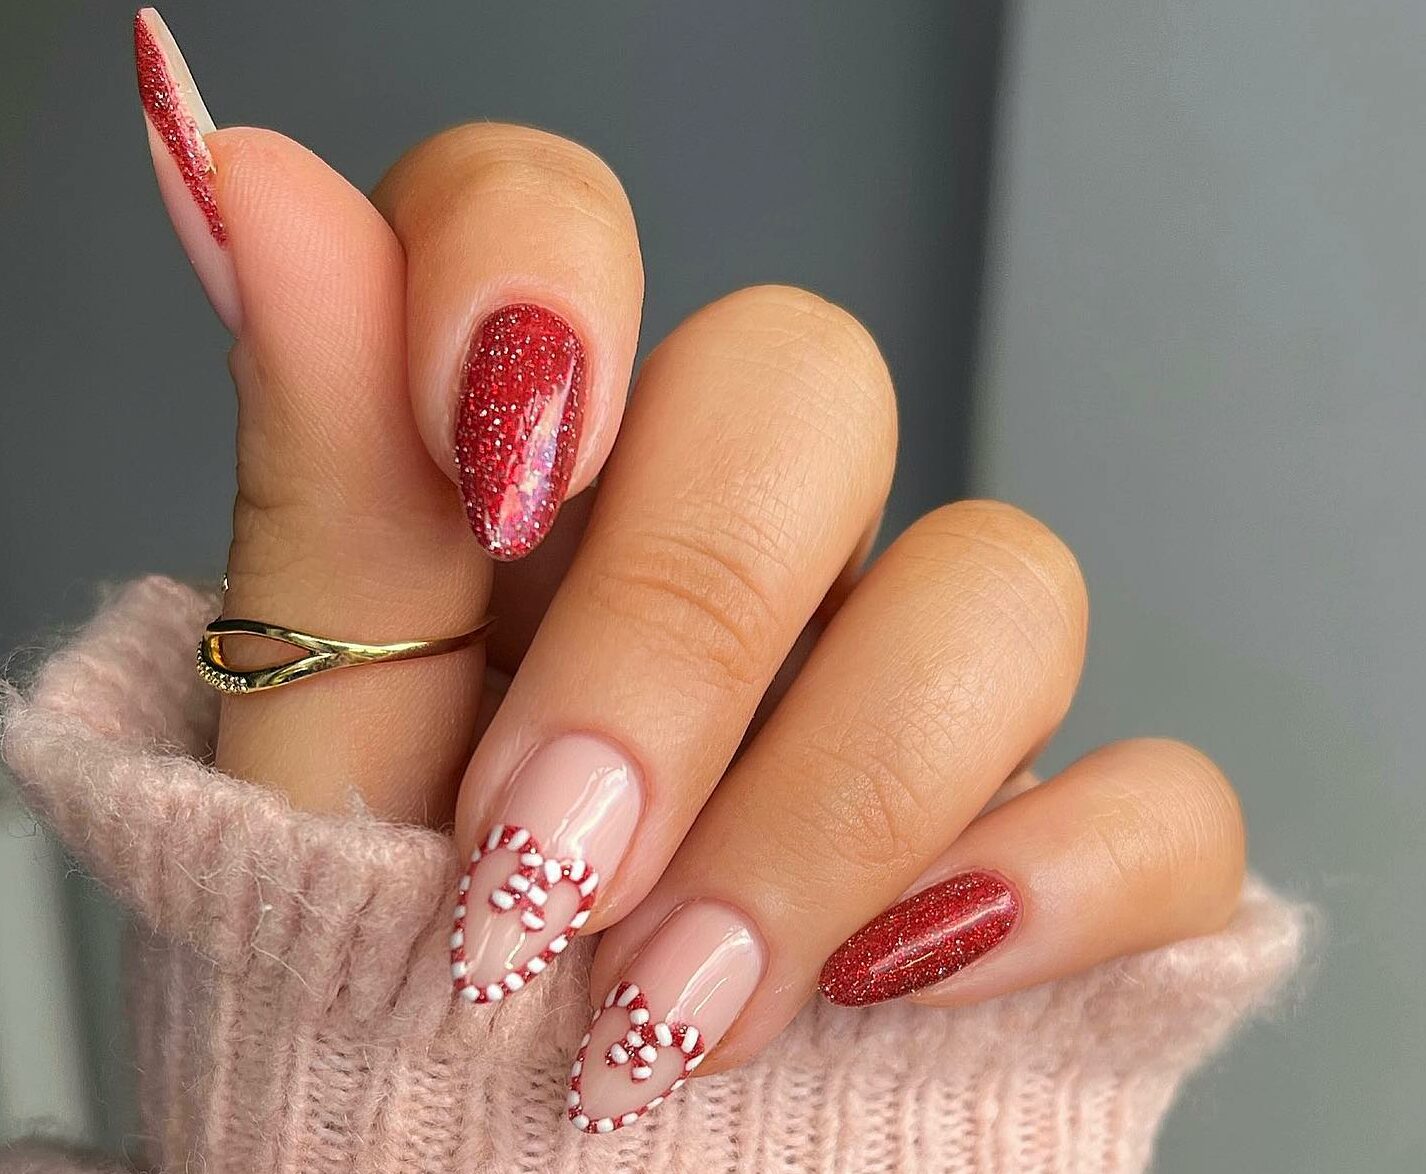 17 Great Nail Looks For The Holidays - Eluxe Magazine